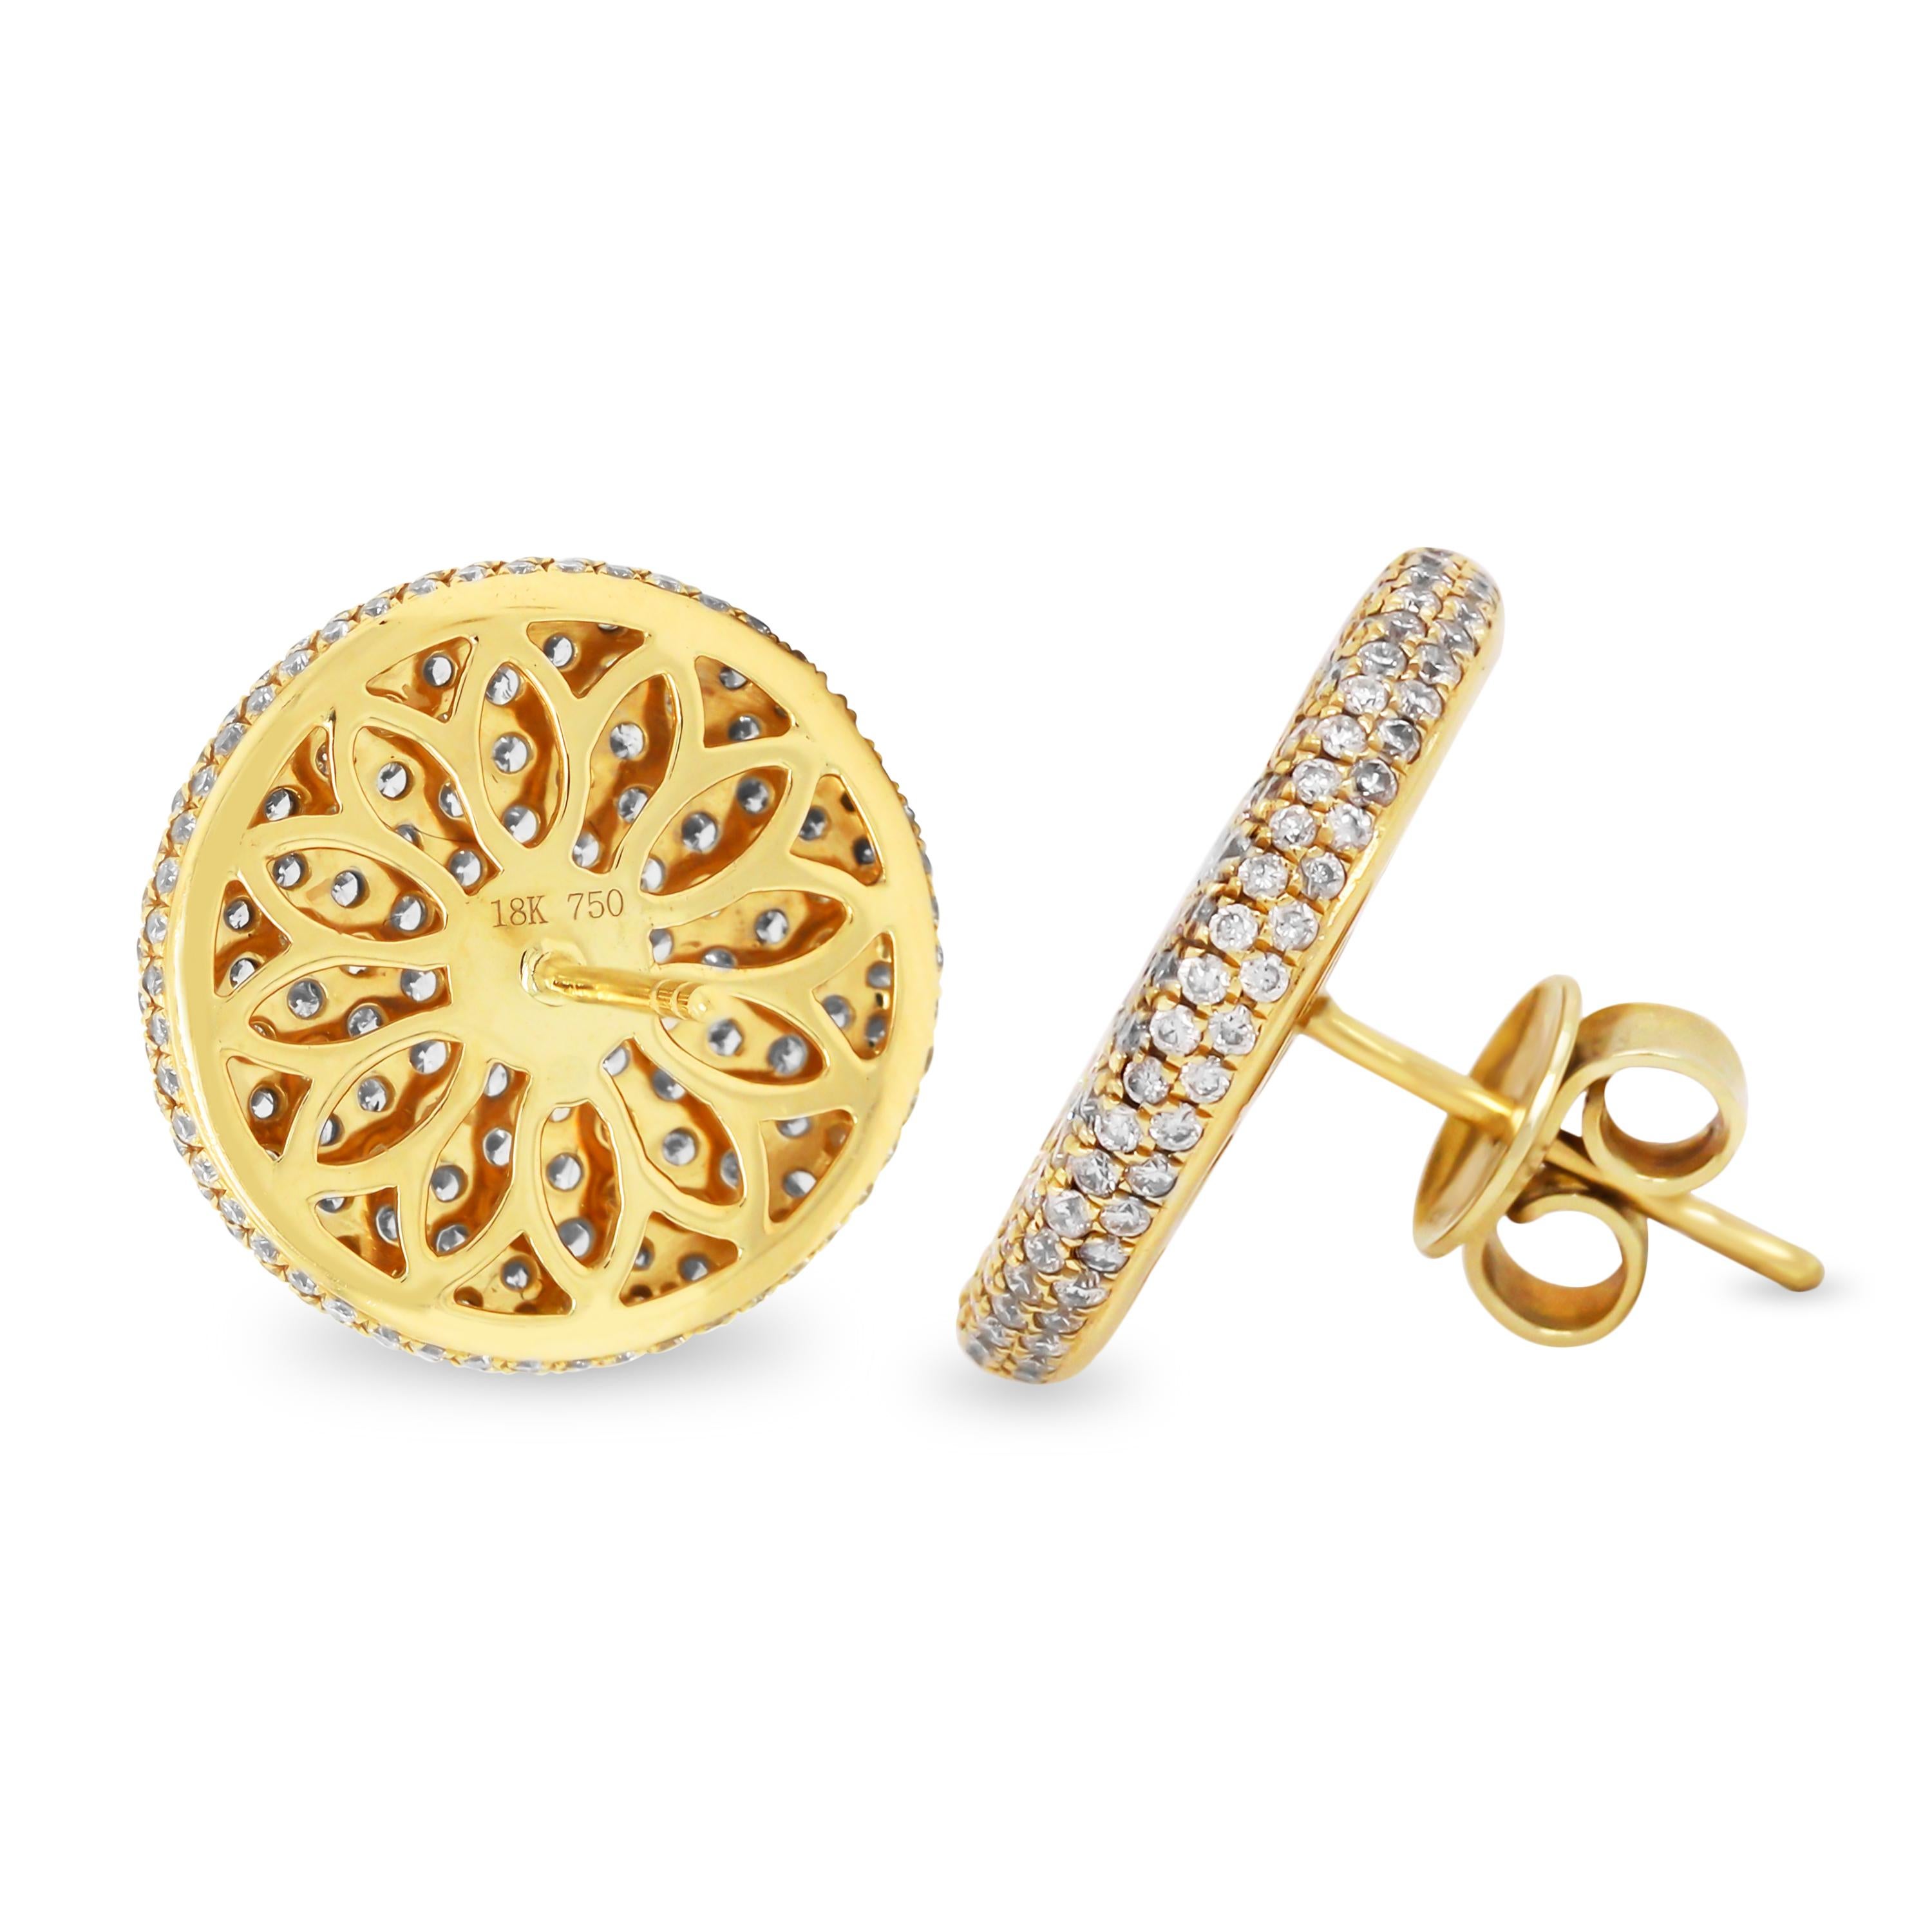 18K Yellow Gold and Diamond Circle Disk Stud Earrings

These fun, everyday earrings feature a circle, disk design with pave set diamonds all throughout.

2.82 carat G color, VS clarity diamonds total weight

0.71 inch width. They are a perfect size